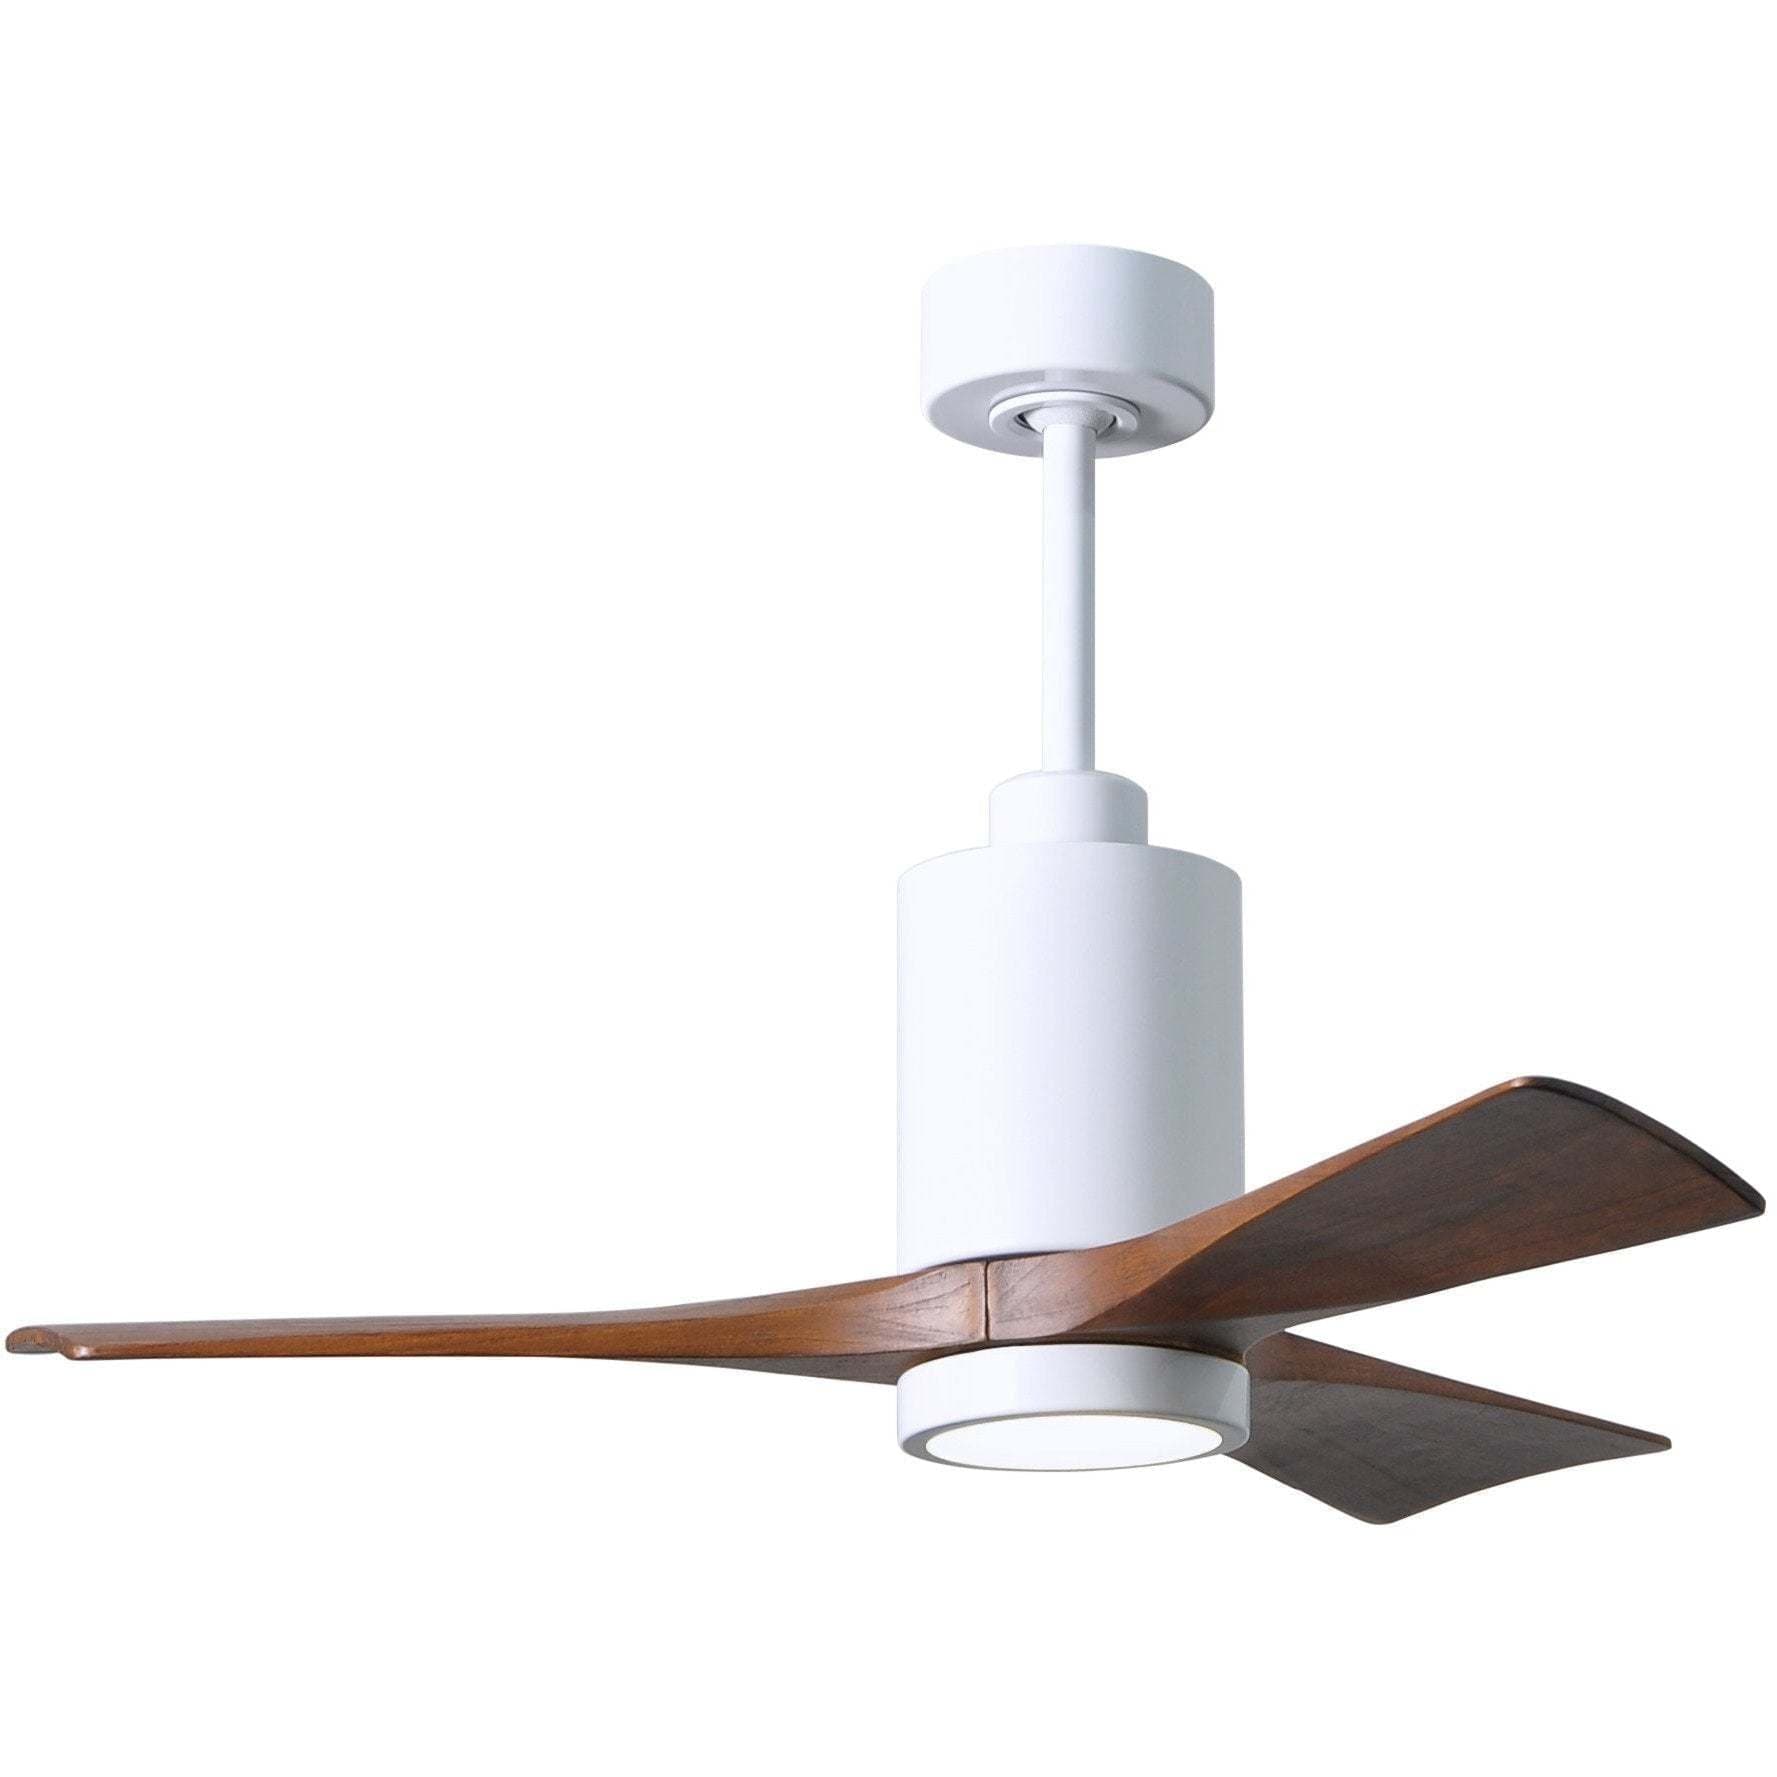 Patricia 3 Blade Ceiling Fan - Image 1